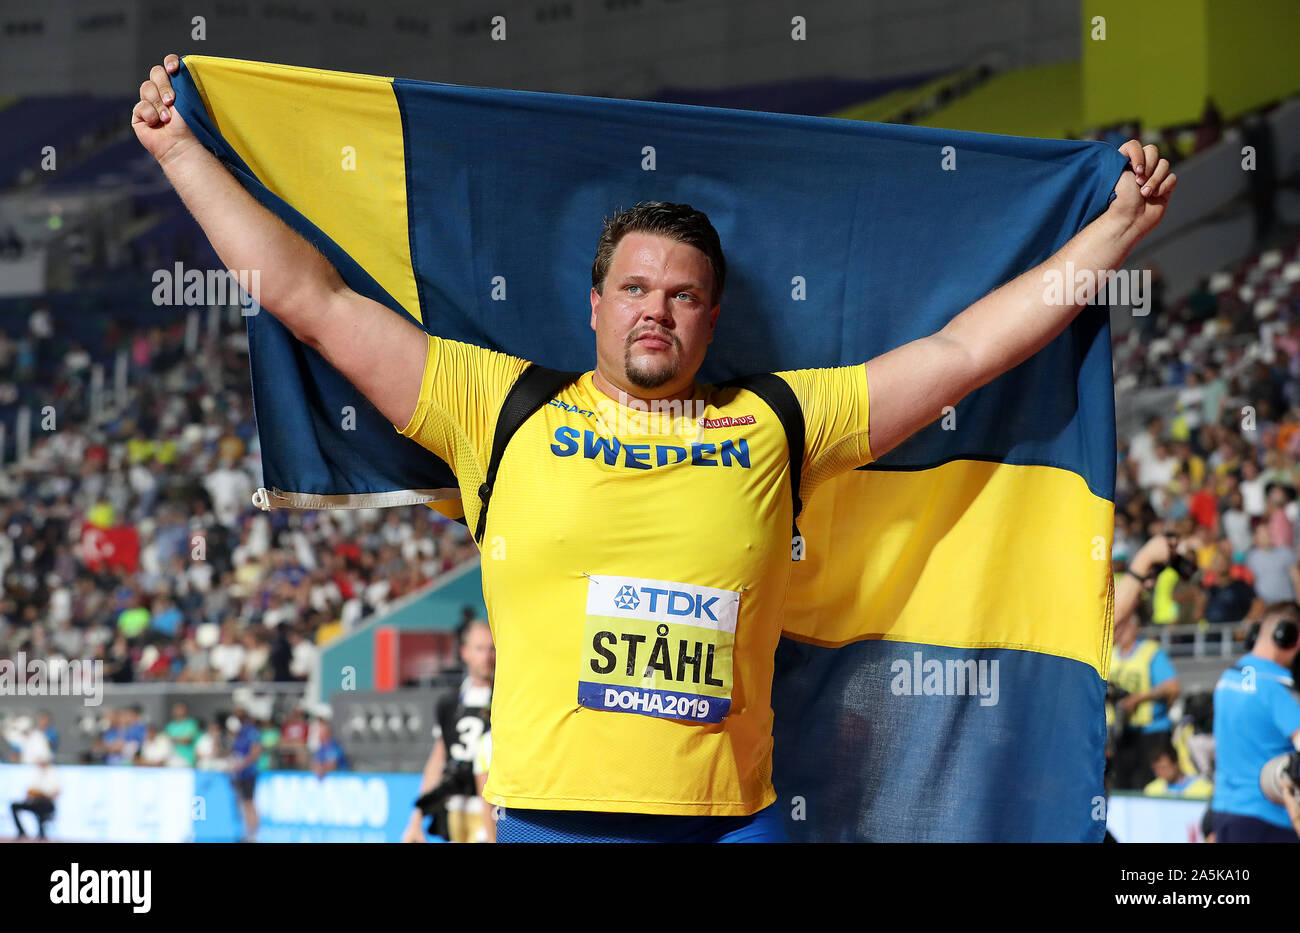 Sweden S Daniel Stahl Celebrates After Winning Gold In The Men S Discus Throw Final Stock Photo Alamy